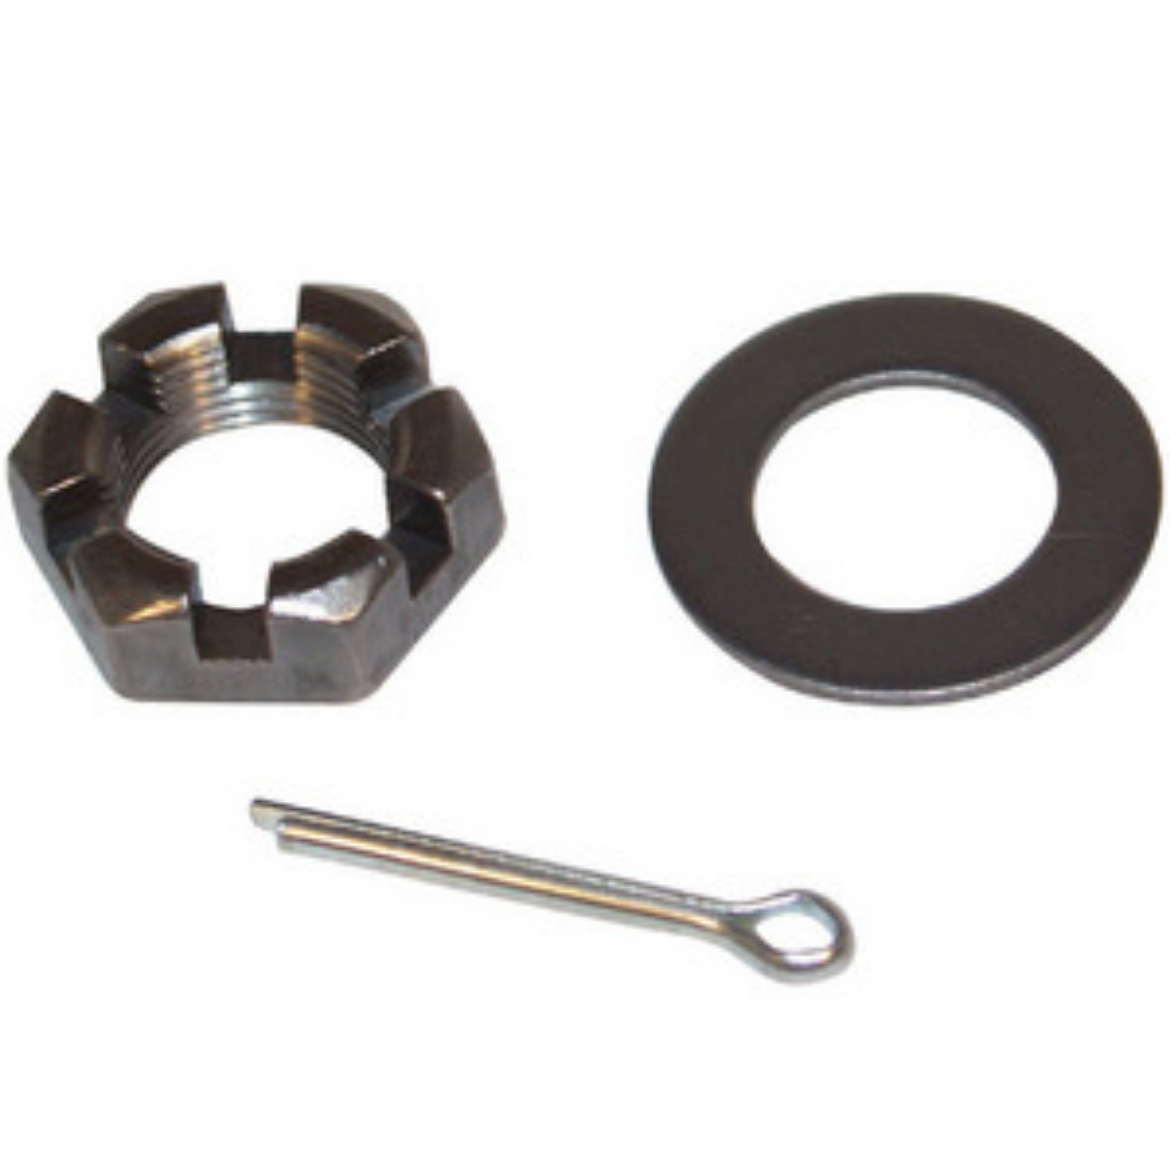 Picture of 1.5T, 2T & PARALLEL 1" AXLE NUT KIT (1"-14UNS)
(Kit Includes 190015, 190007, 190005)